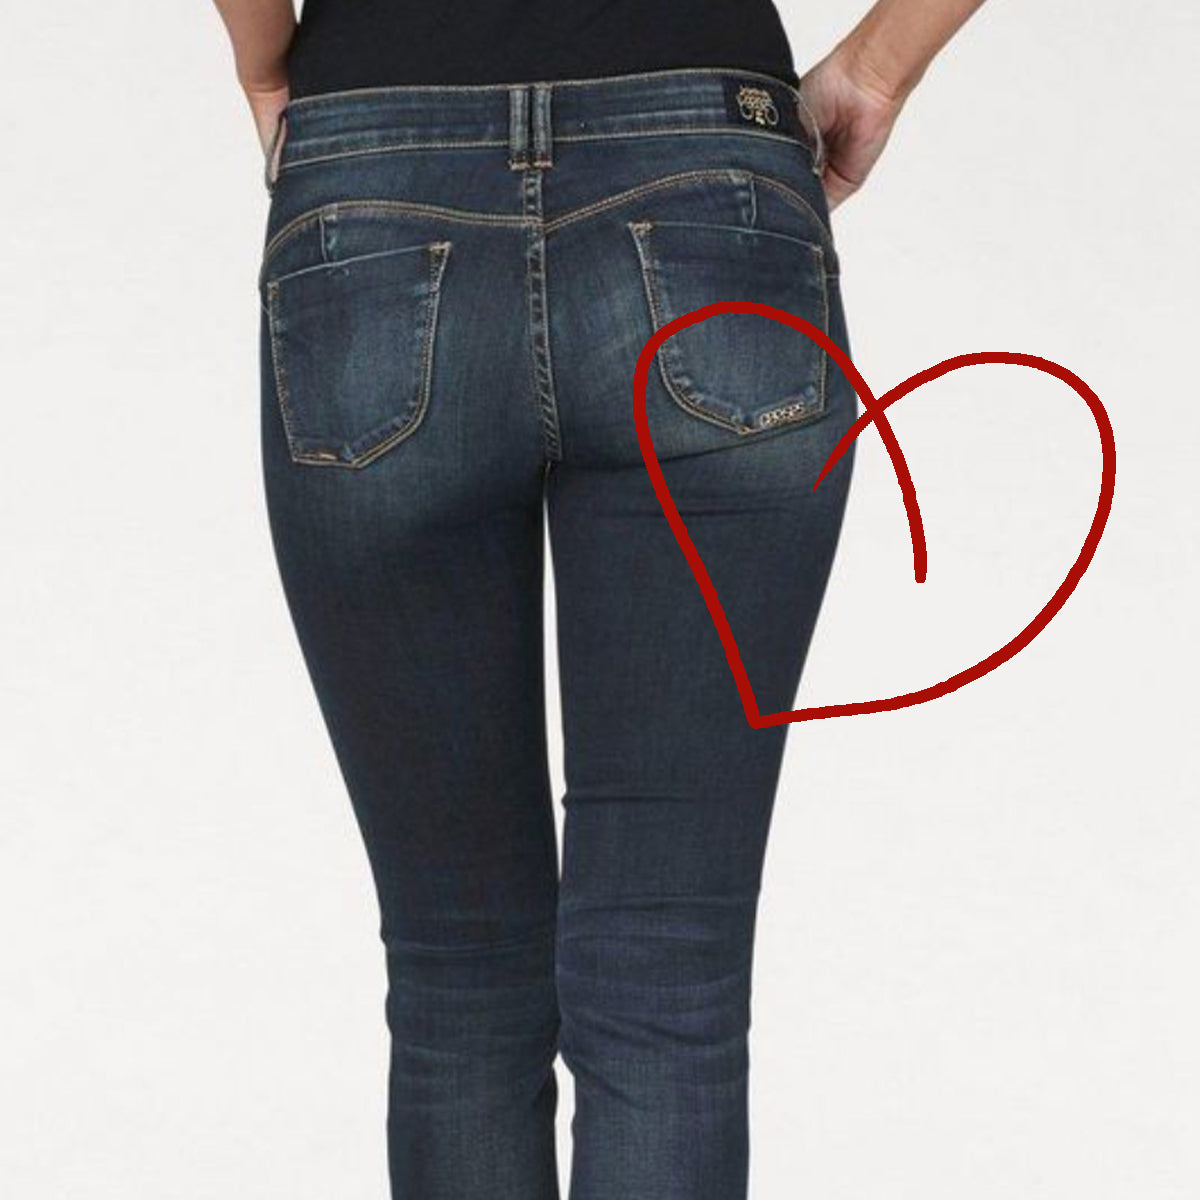 Jean-ius! Your search for the perfect pair is over...